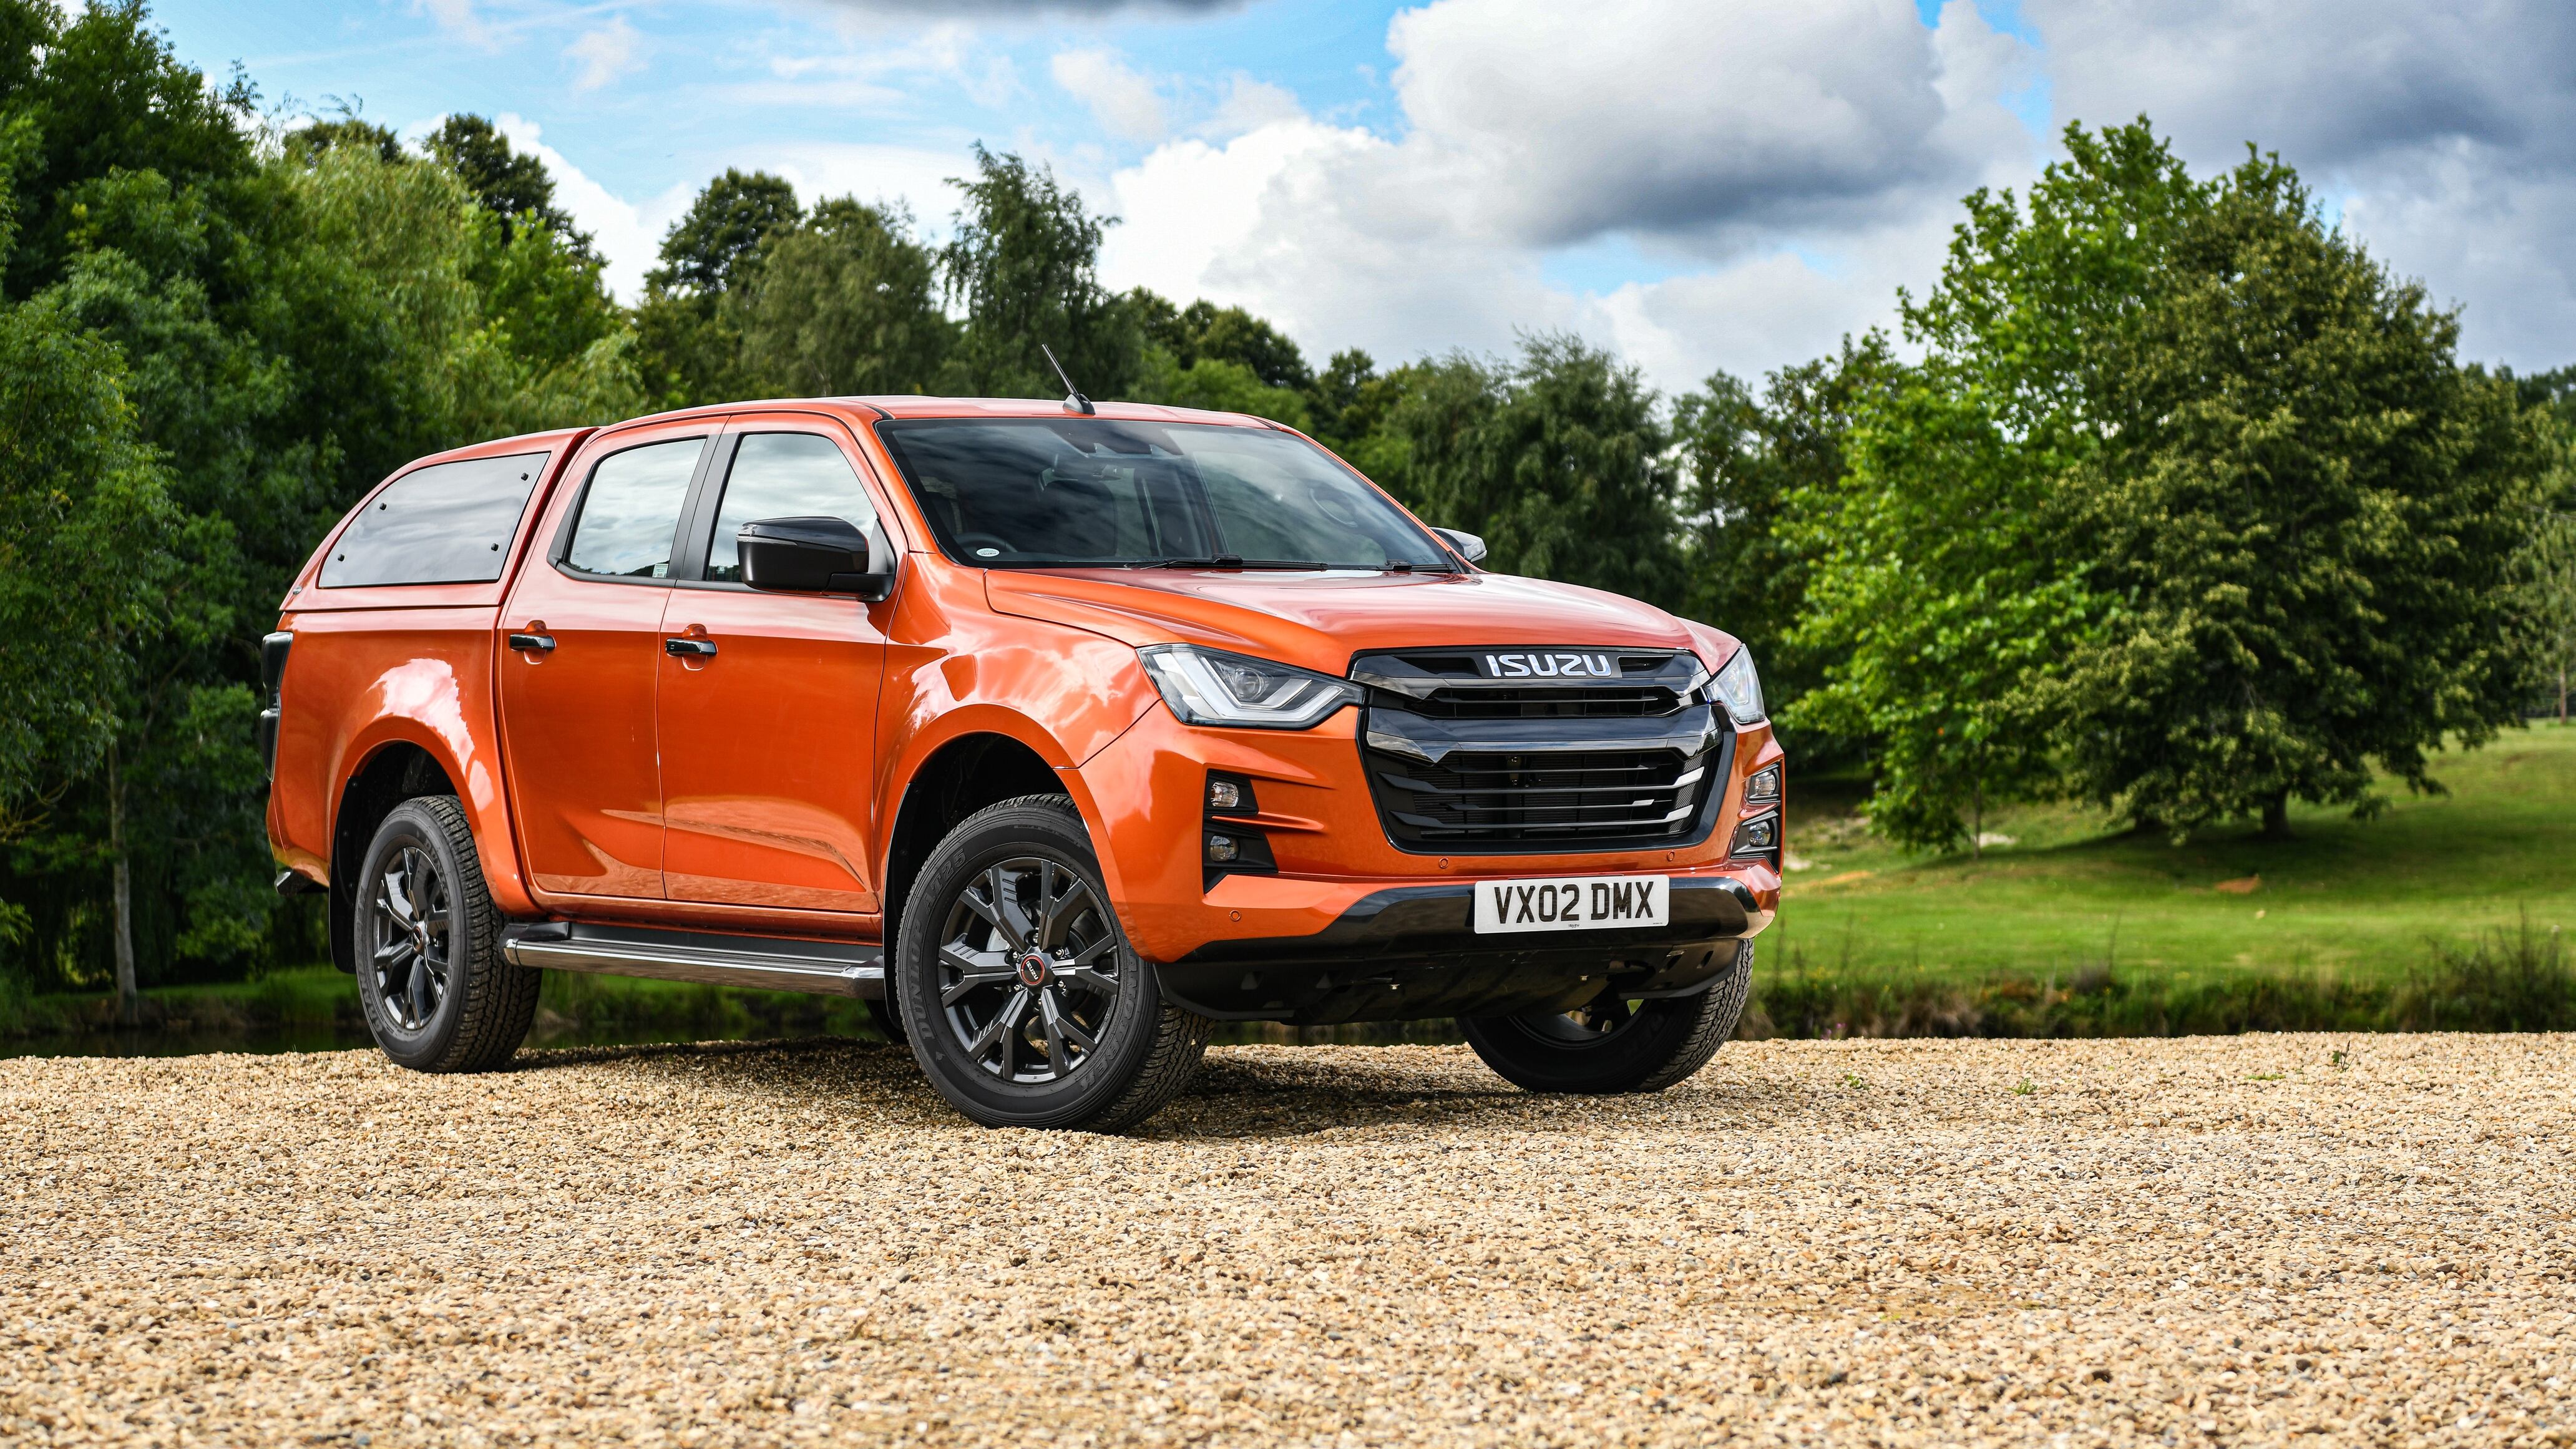 The D-Max has always been a reliable tool for those who need a no-nonsense pick-up